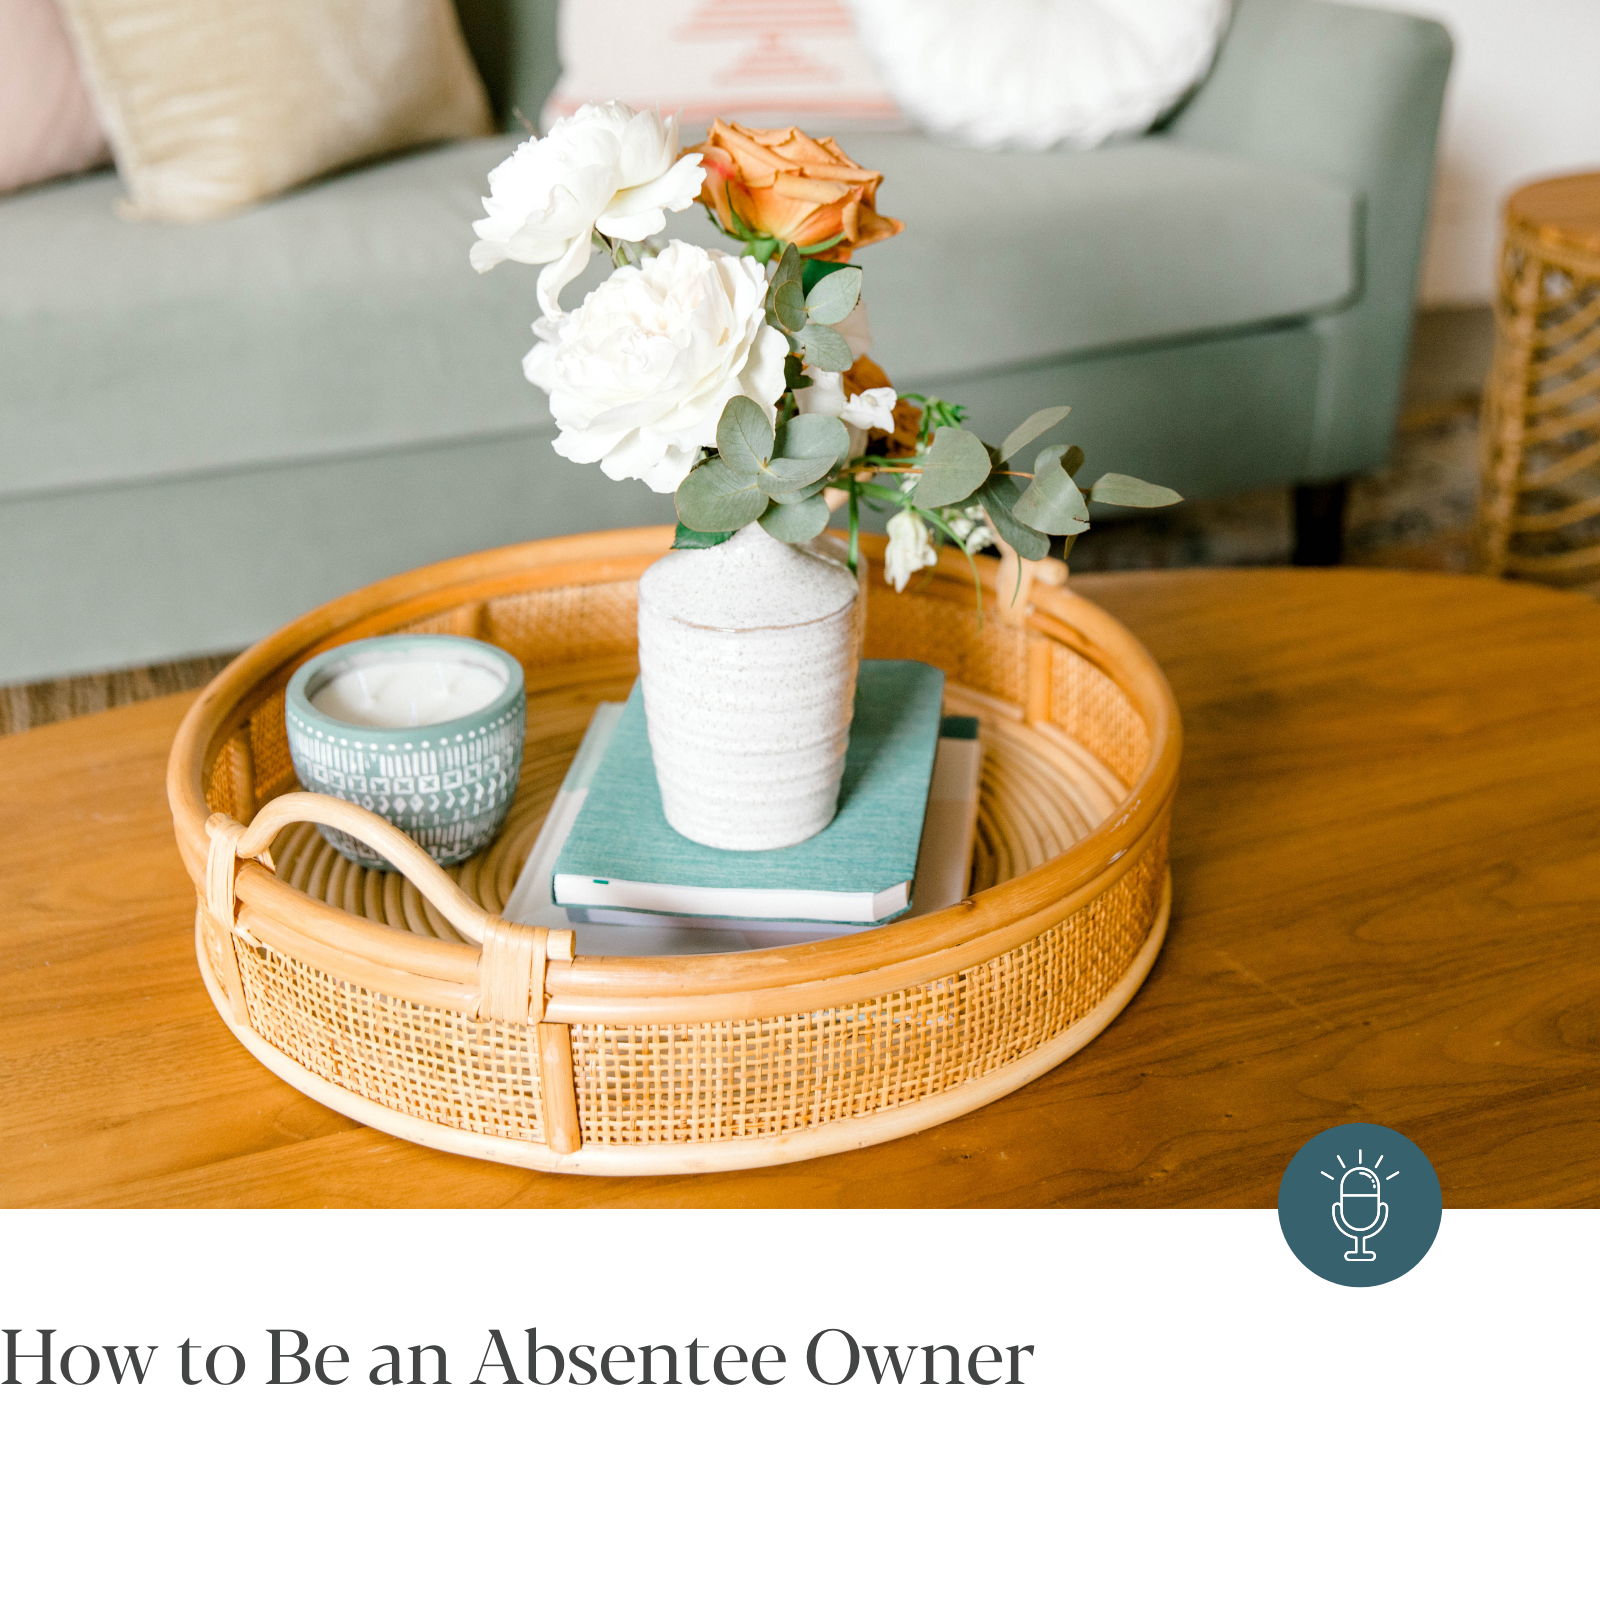 Episode #197 - How to Be an Absentee Owner